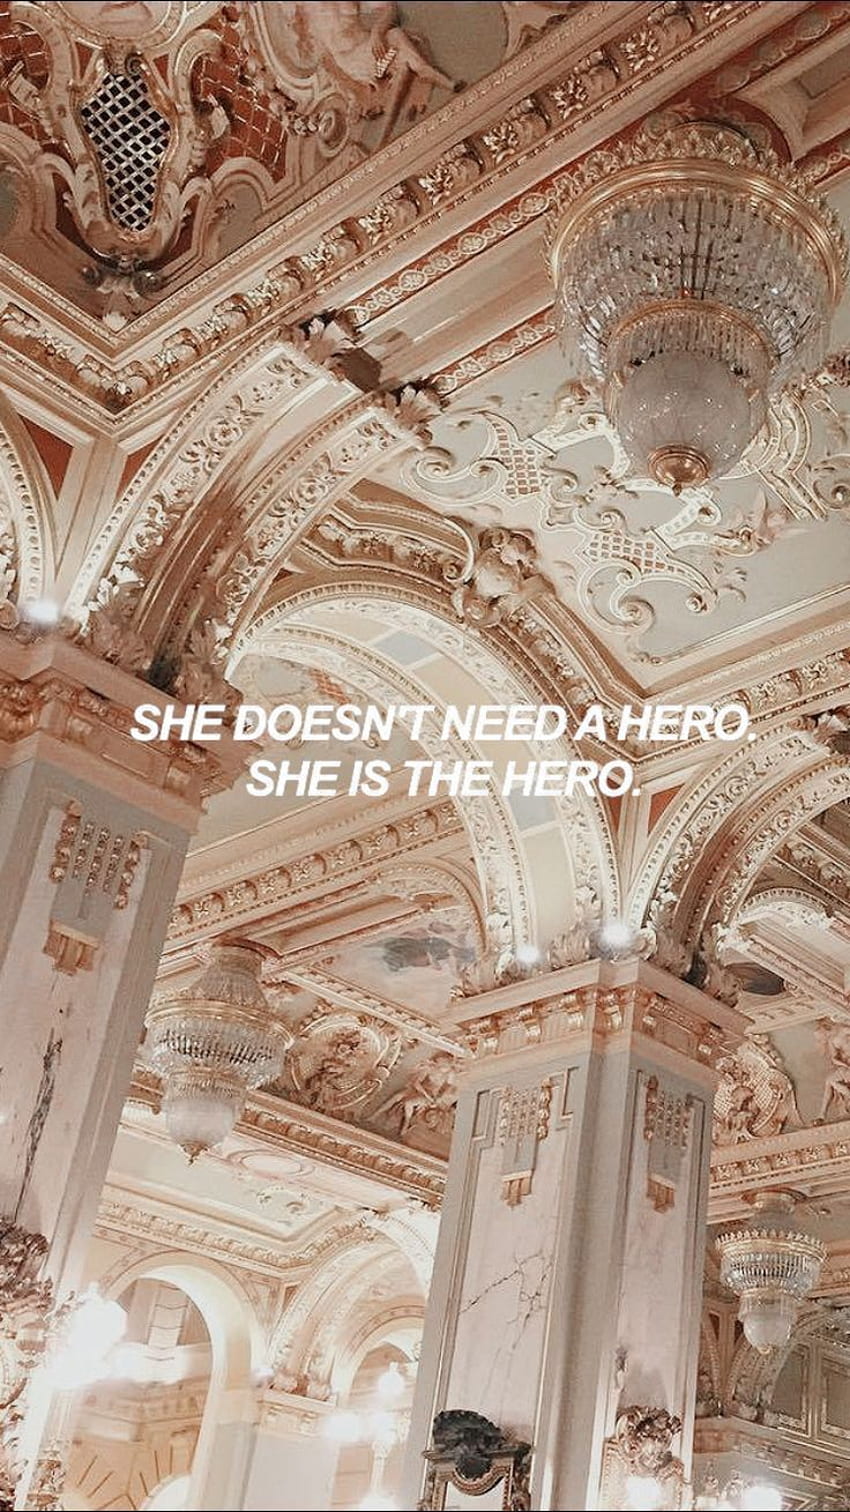 She doesn't need a hero. She is the hero. - Architecture, light academia, quotes